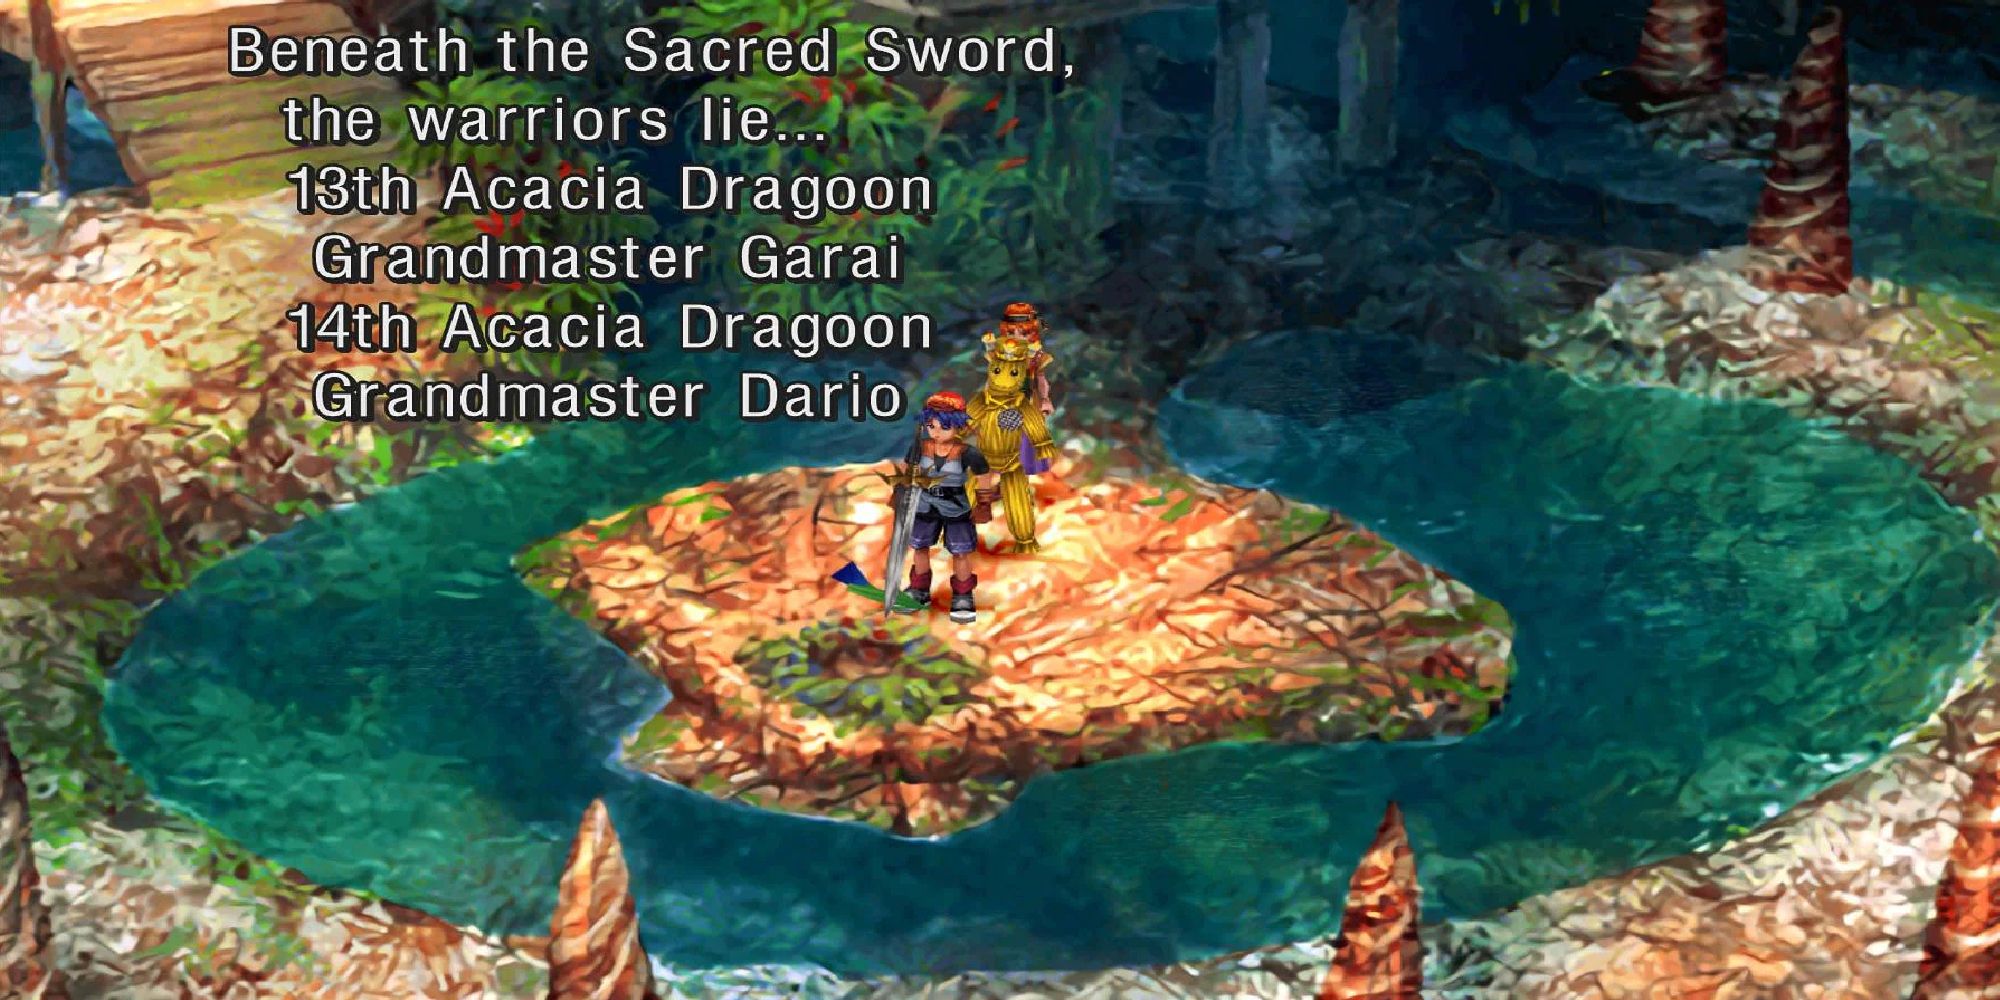 Serge reads the writing on Dario's grave in Chrono Cross